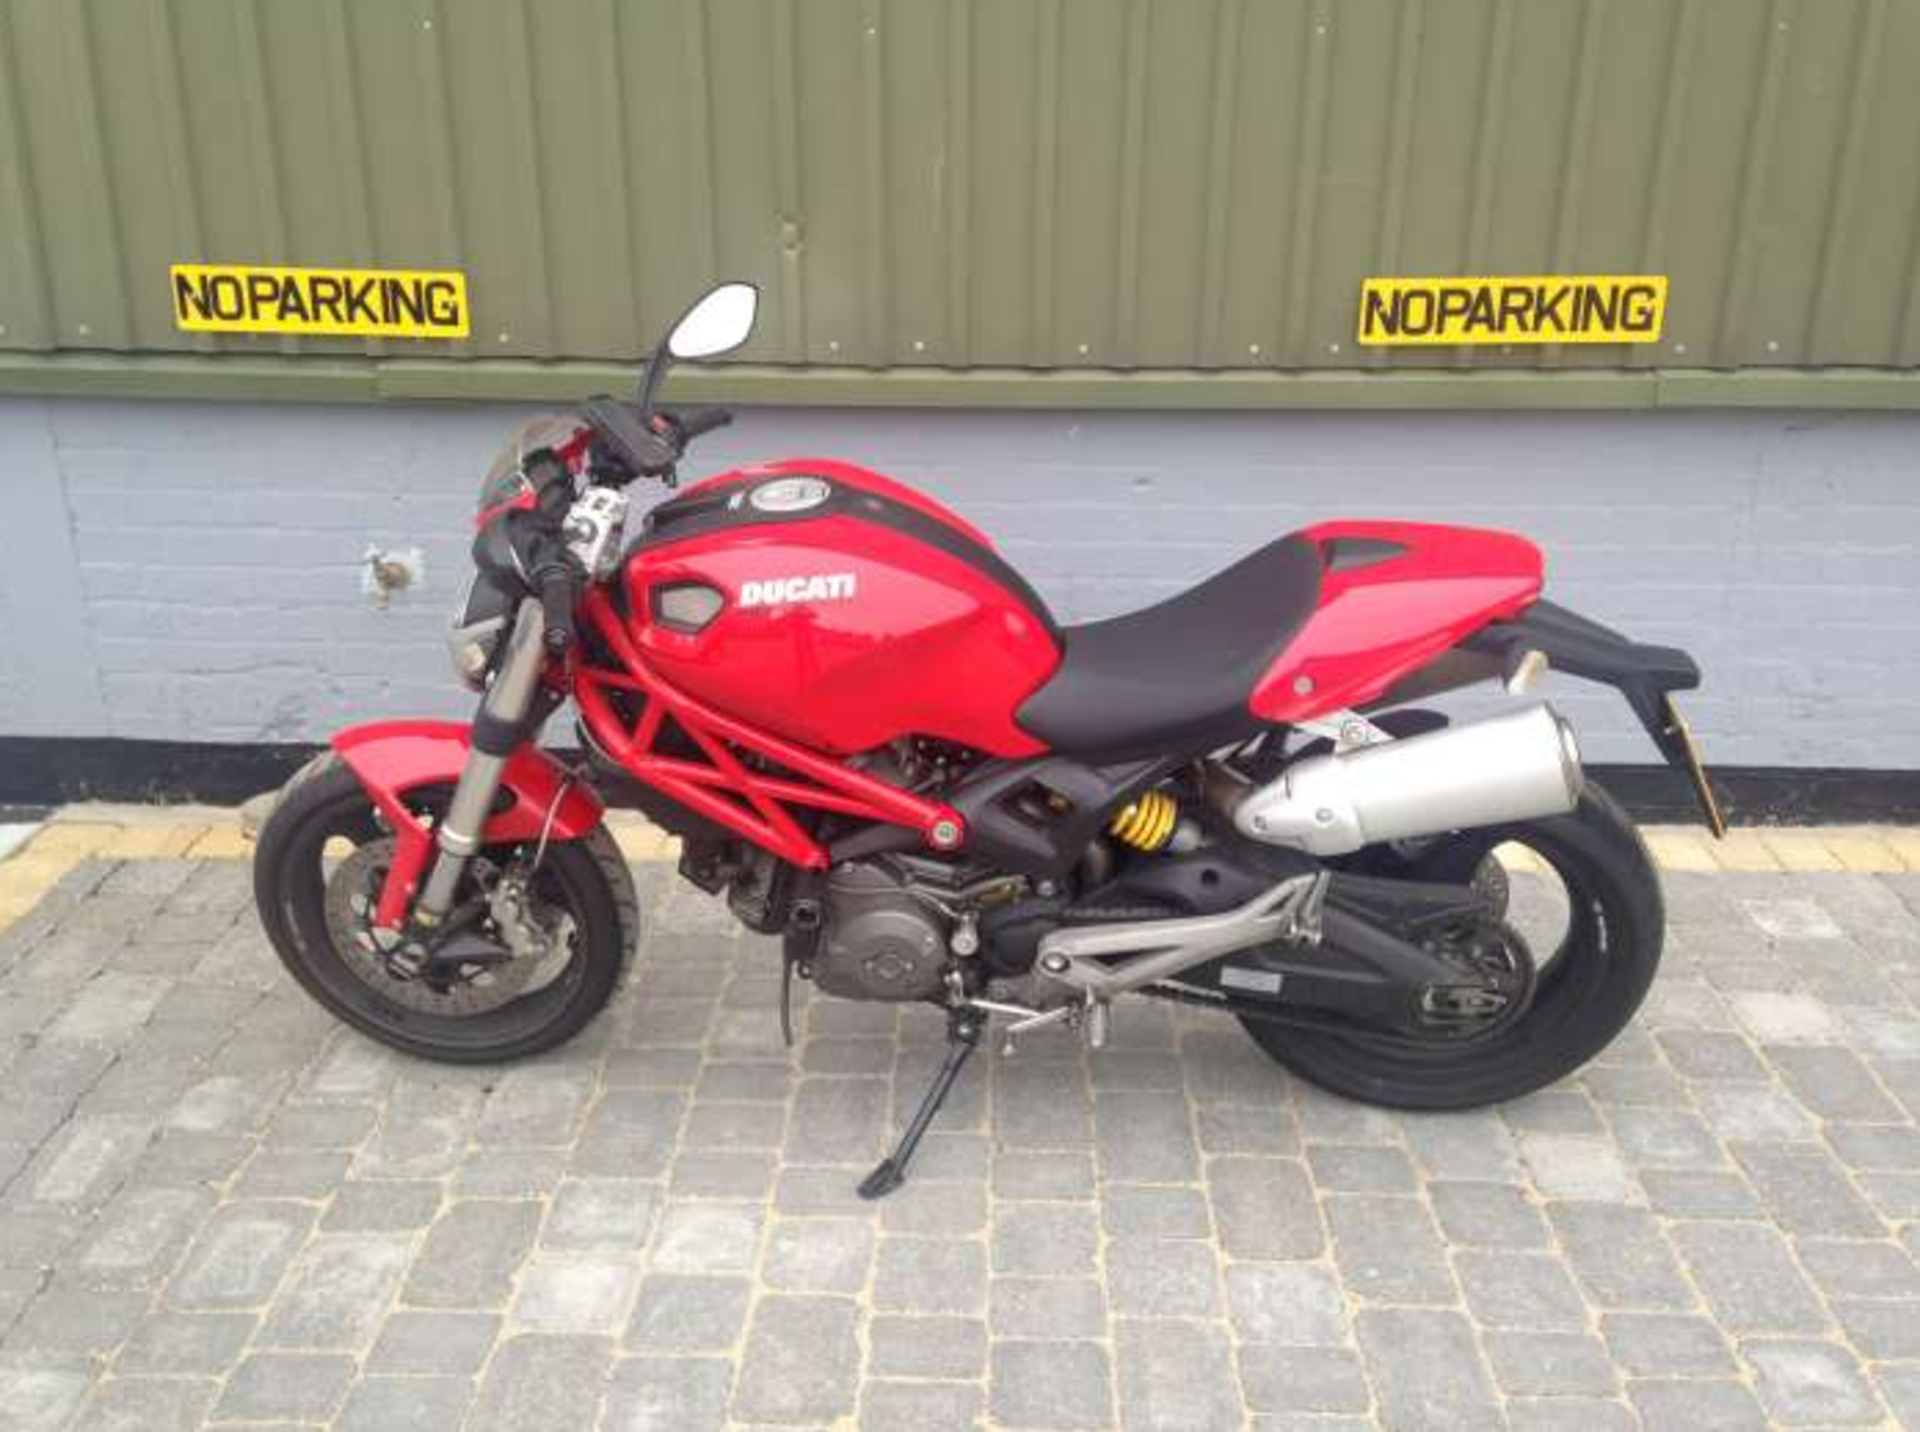 2009 Ducati 696 Monster - Very low mileage - Image 7 of 11